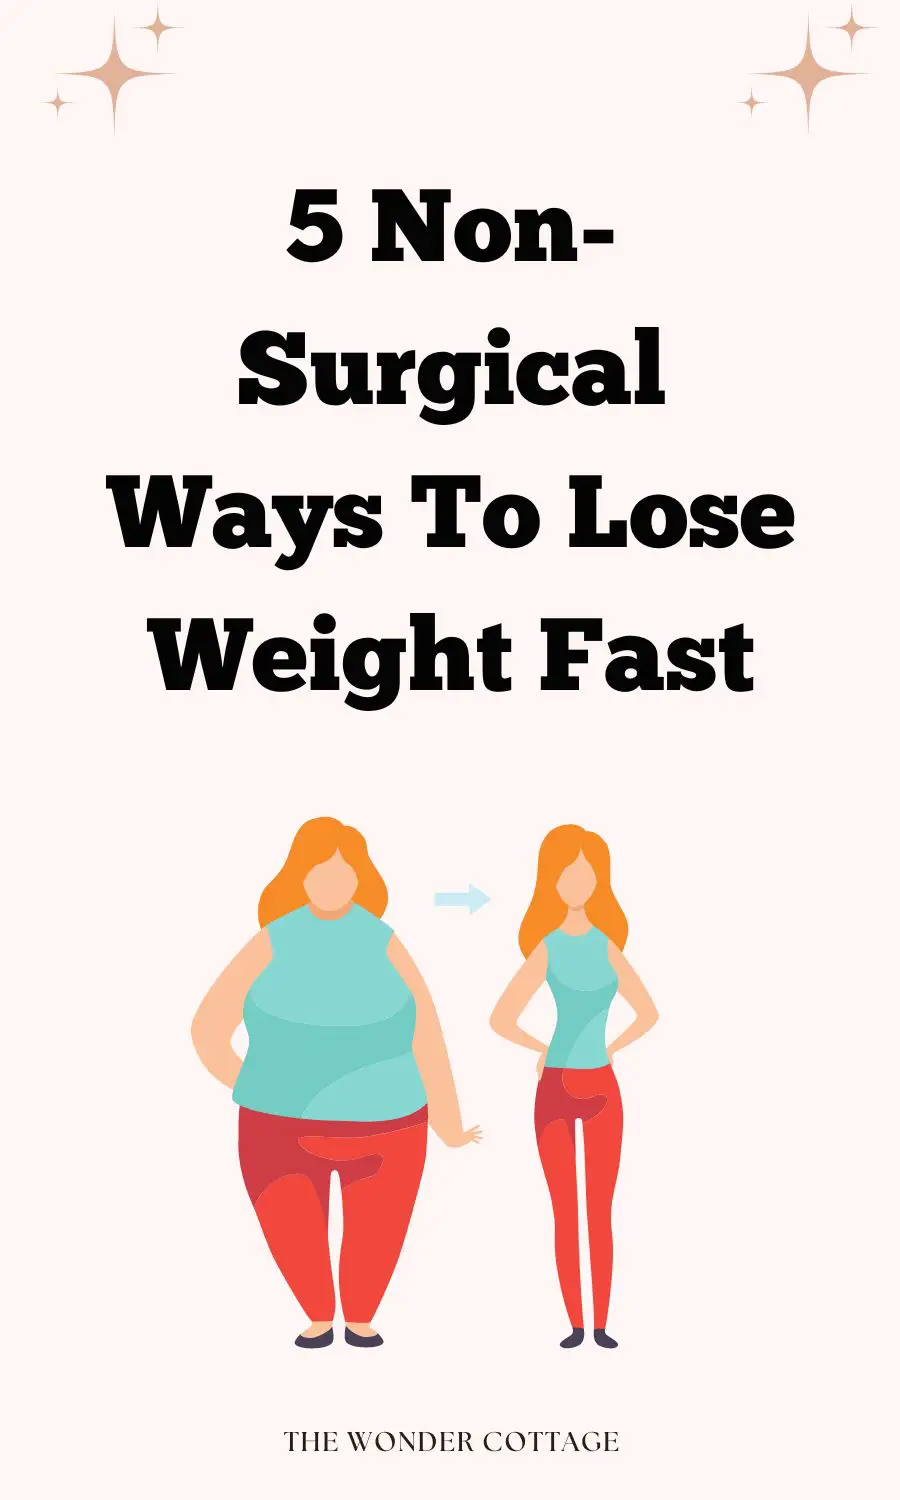 Non-Surgical Ways To Lose Weight Fast